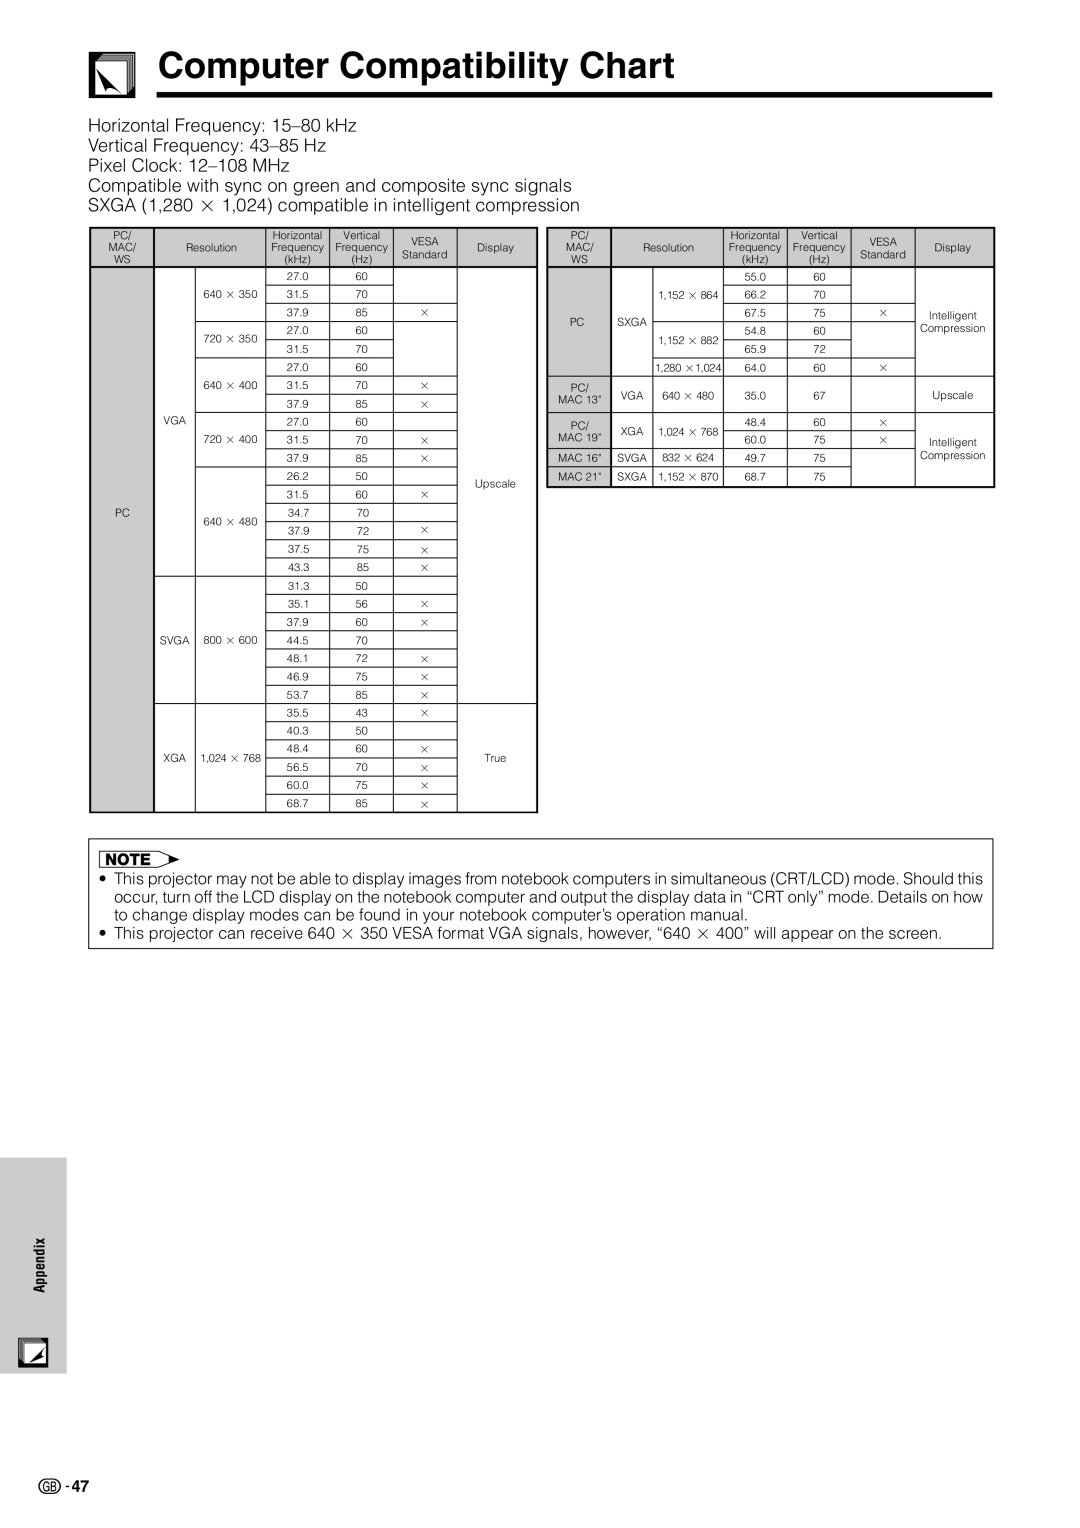 Sharp PG-C20XE appendix Computer Compatibility Chart, Horizontal Frequency 15-80 kHz Vertical Frequency 43-85 Hz 